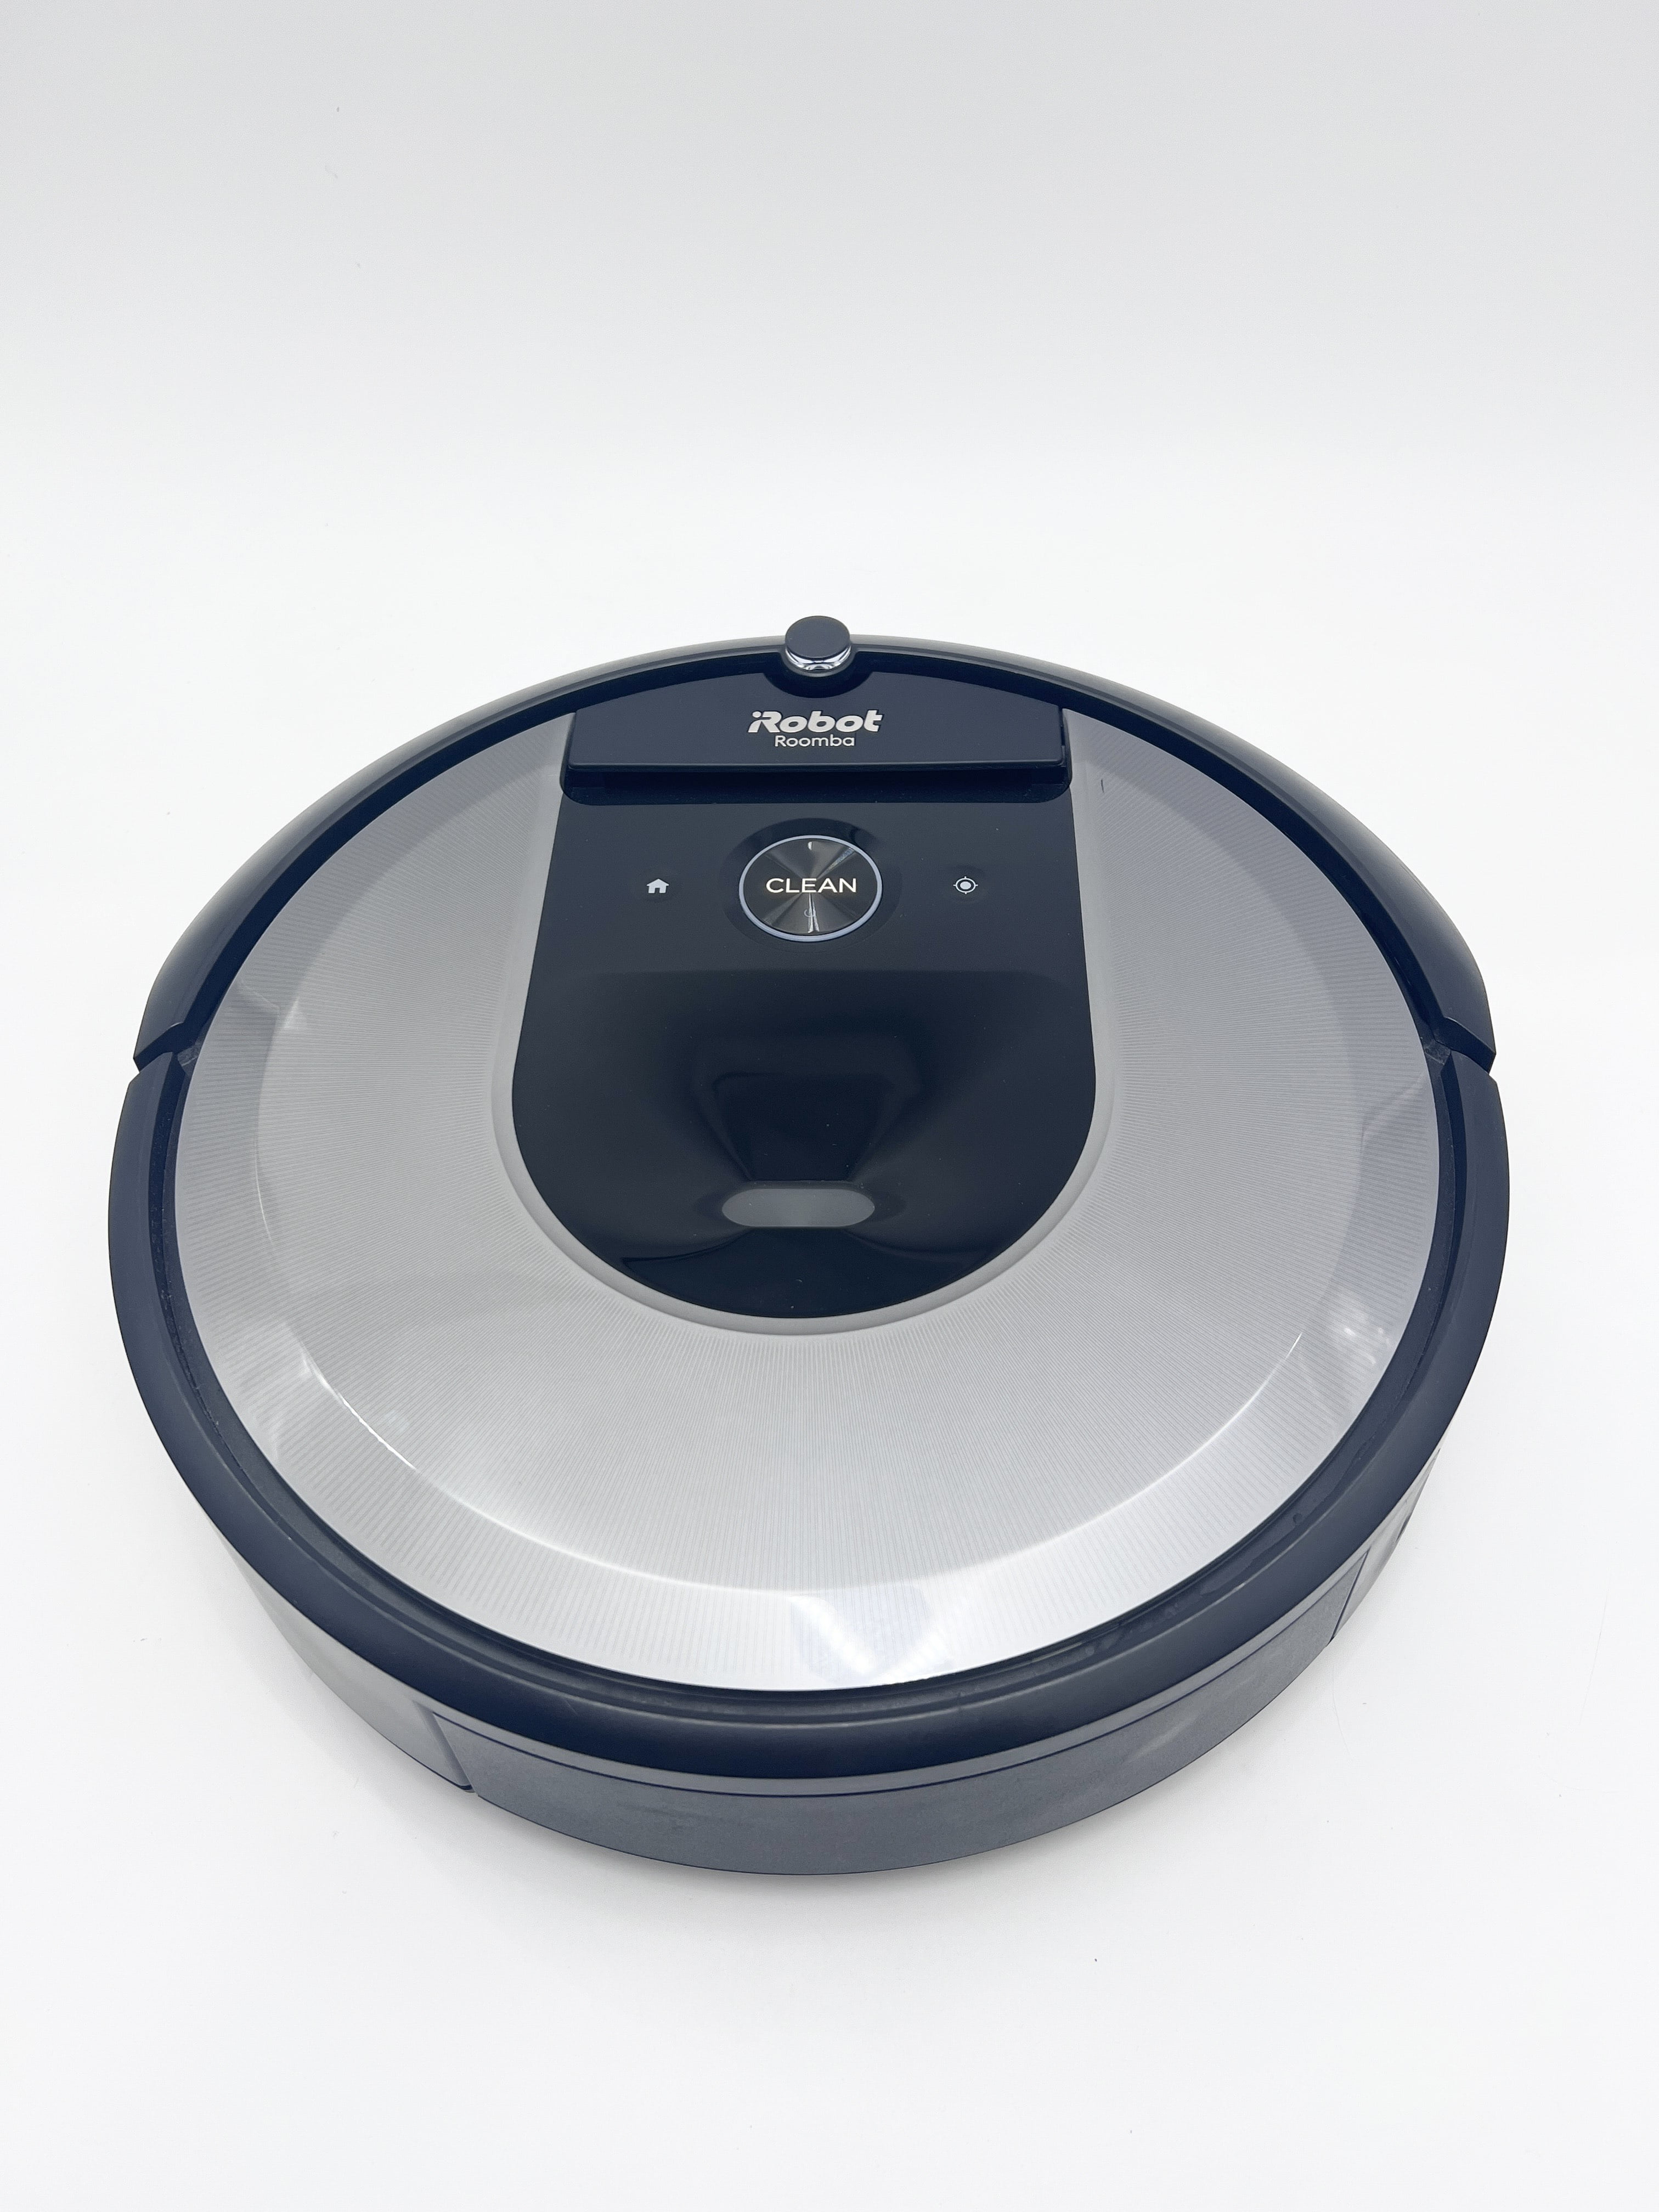  iRobot Roomba i8+ (8550) Self-Emptying Robot Vacuum, Automatic  Dirt Disposal, Empties Itself for up to 60 Days, Wi-Fi, Compatible with  Alexa, Medium Silver, Smart Mapping, with MTC Microfiber Cloth